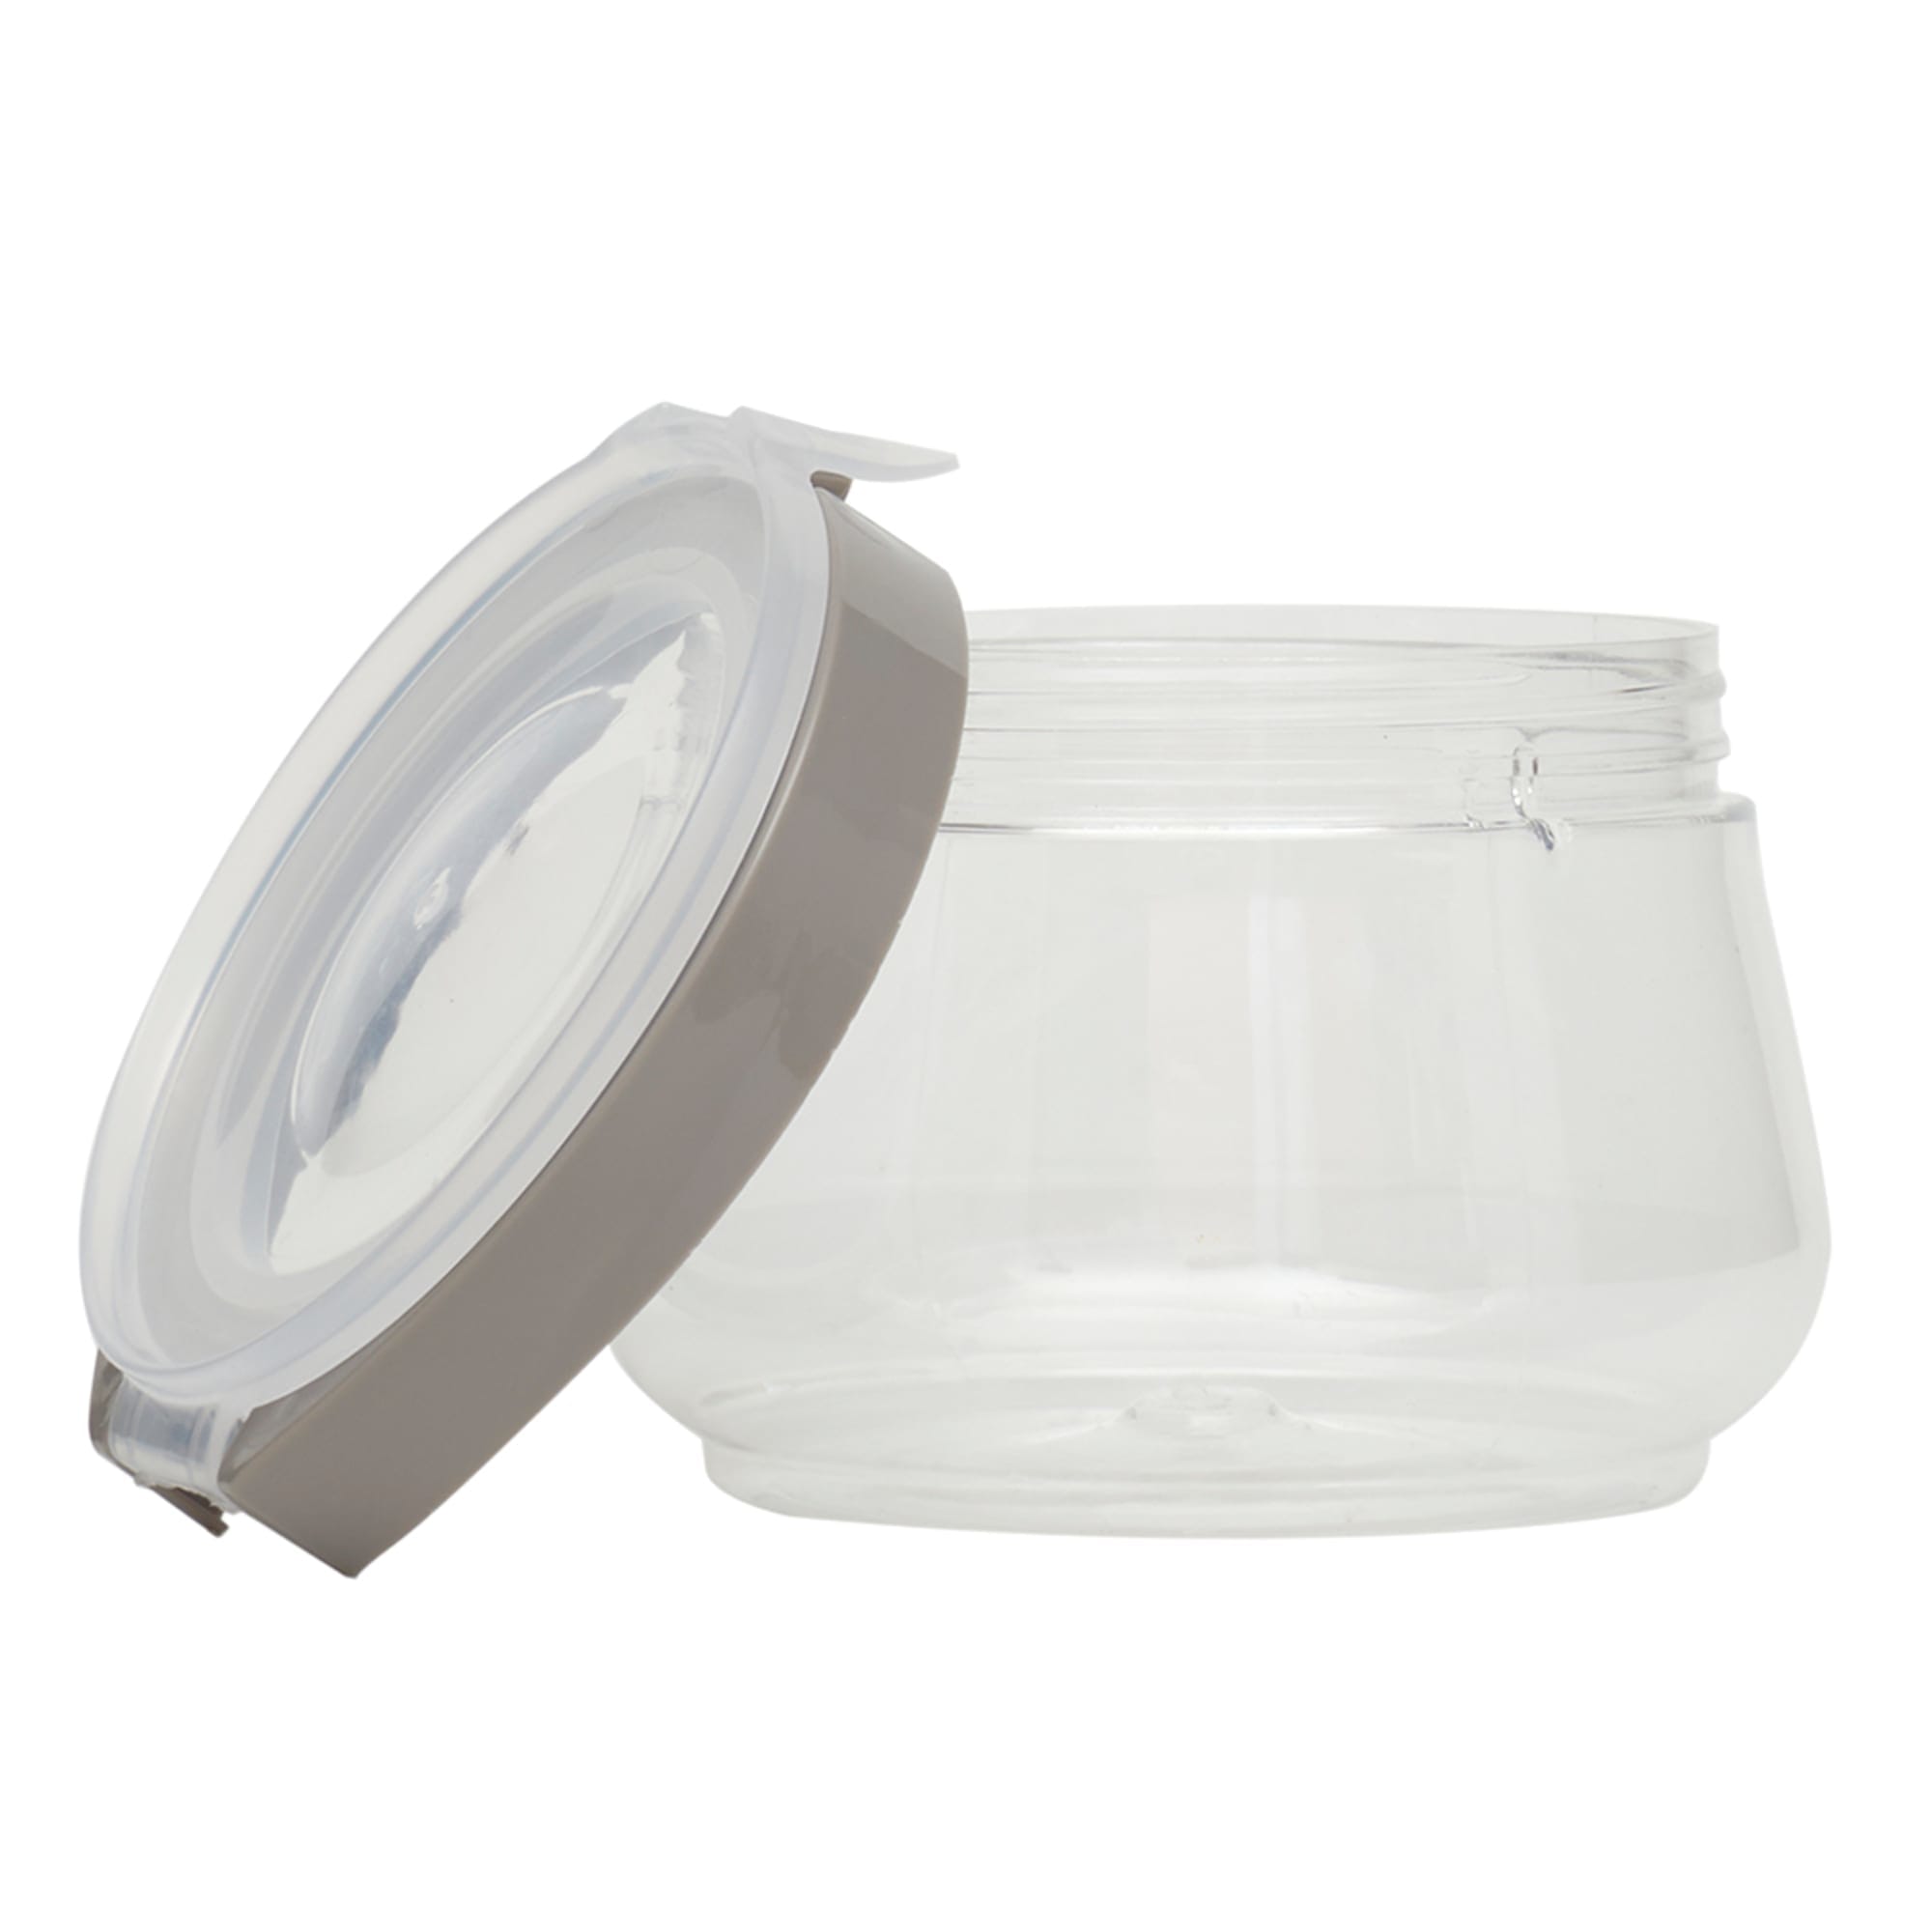 Home Basics 23 oz  Plastic Fliptop Container $3.00 EACH, CASE PACK OF 8